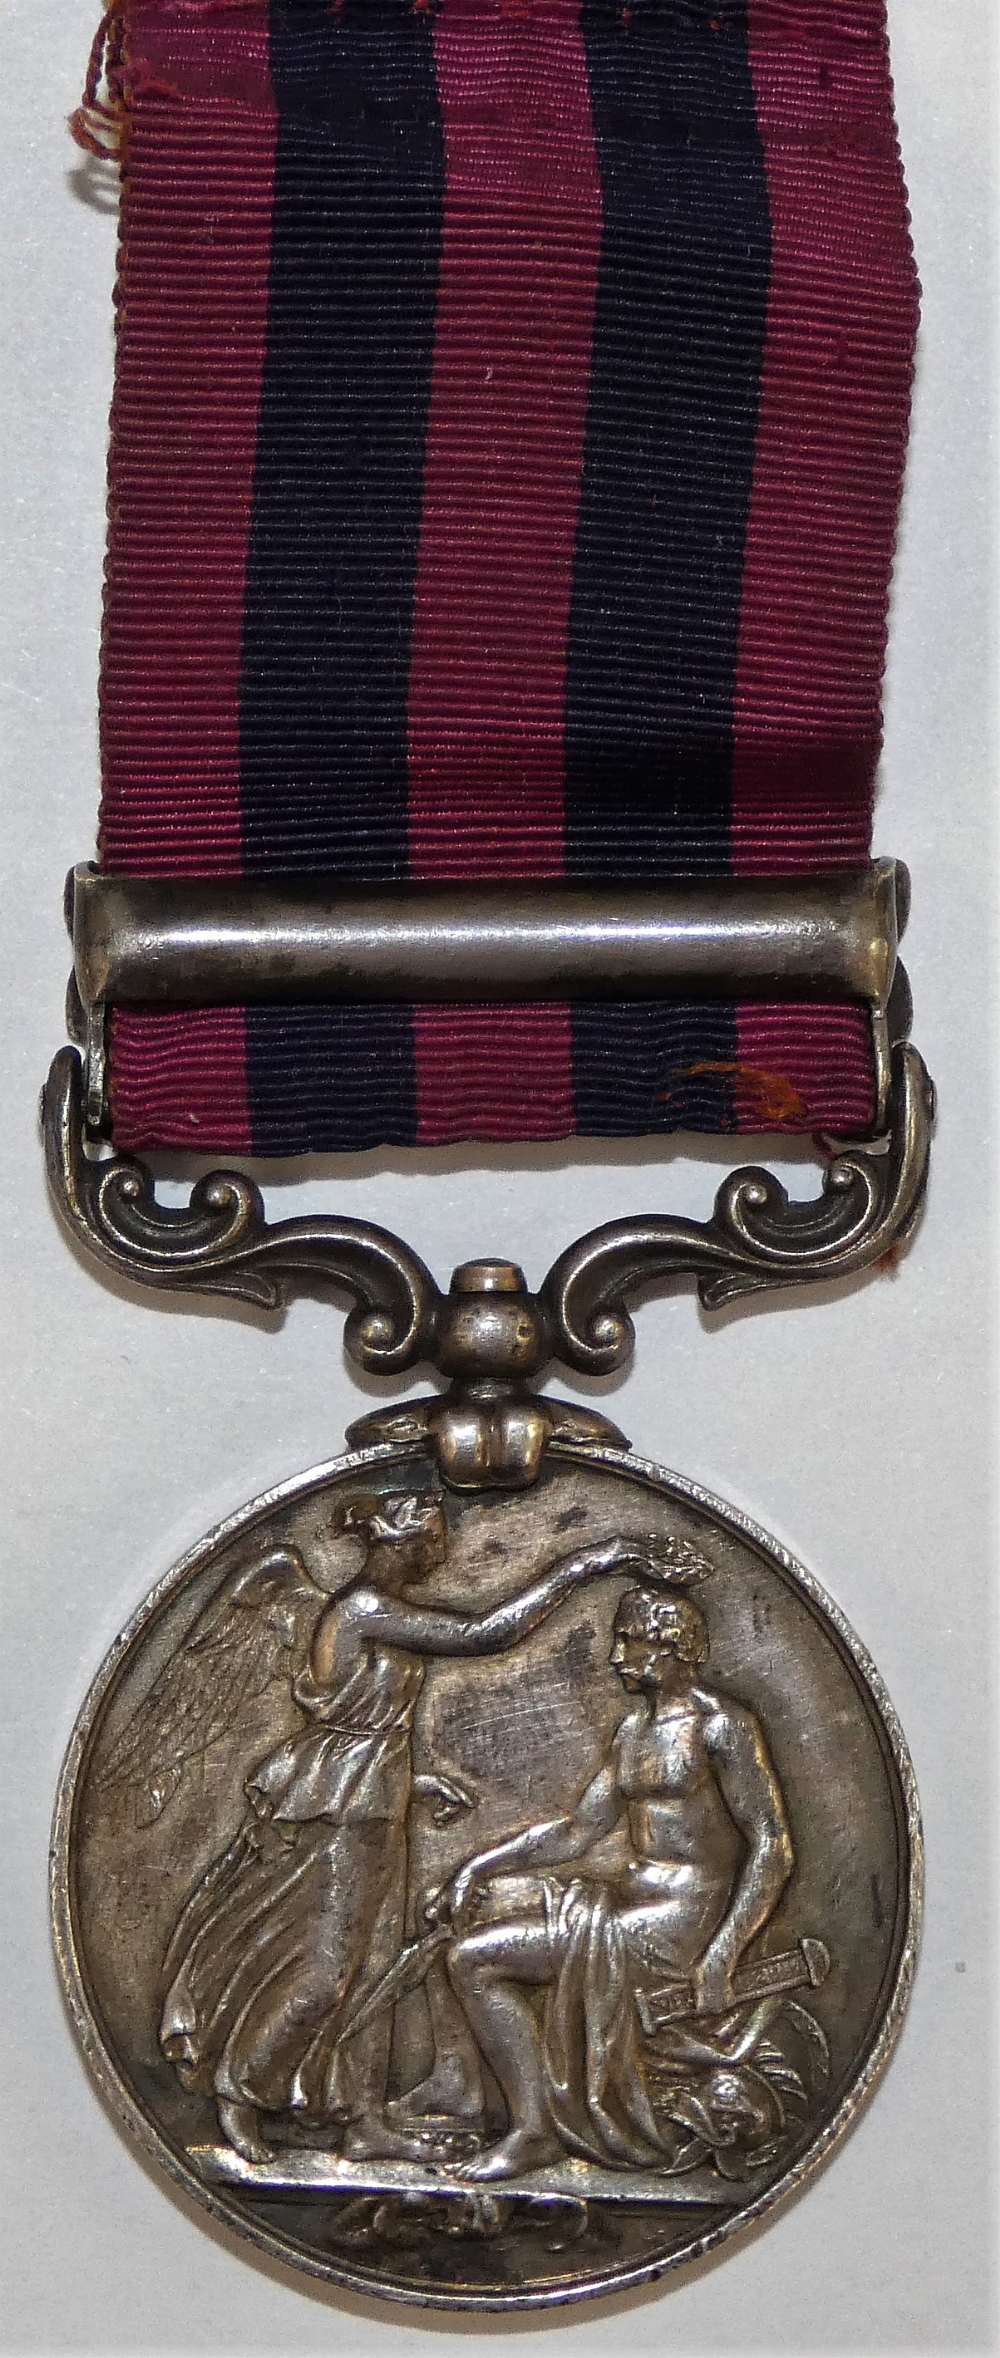 The India General Service Medal (1854-95), with bar Umbeyla (20th October to 23rd December 1863) - Image 2 of 2